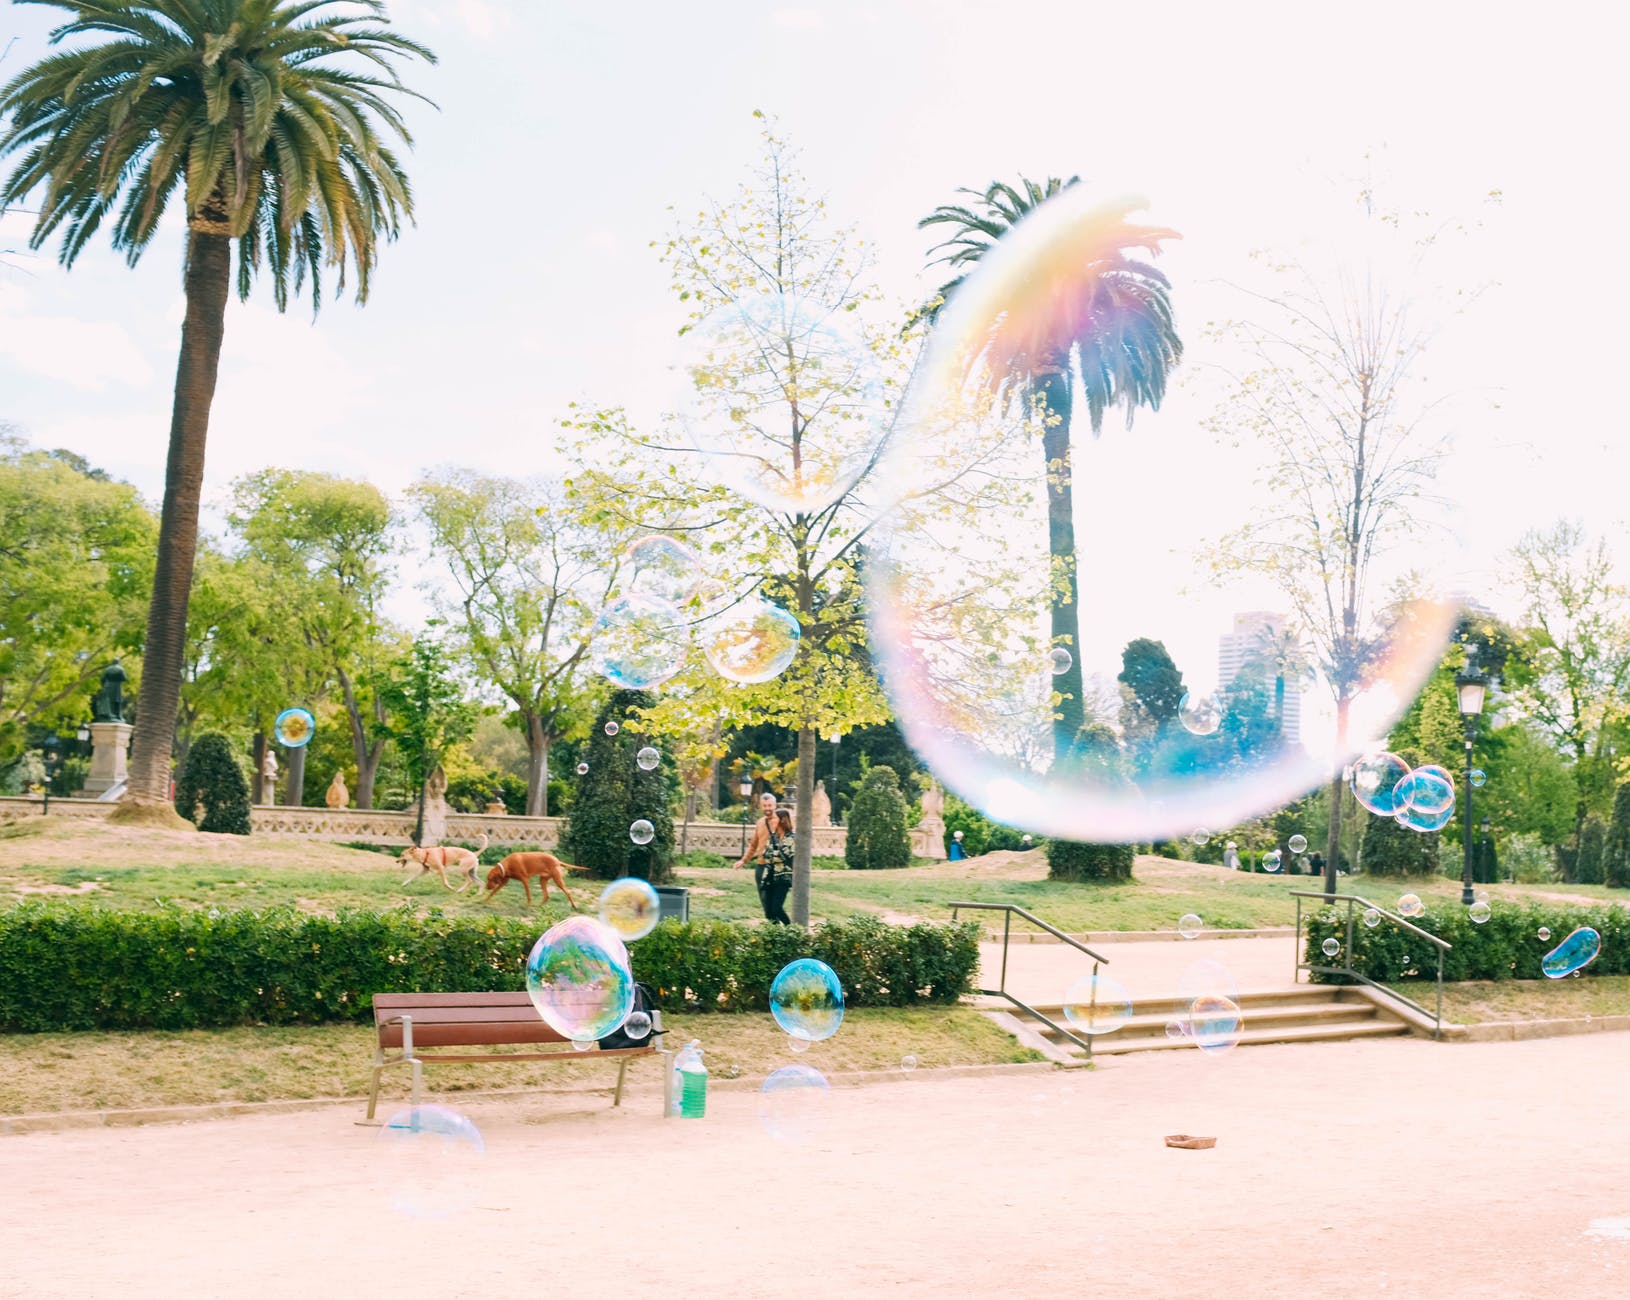 bubbles floating during daytime